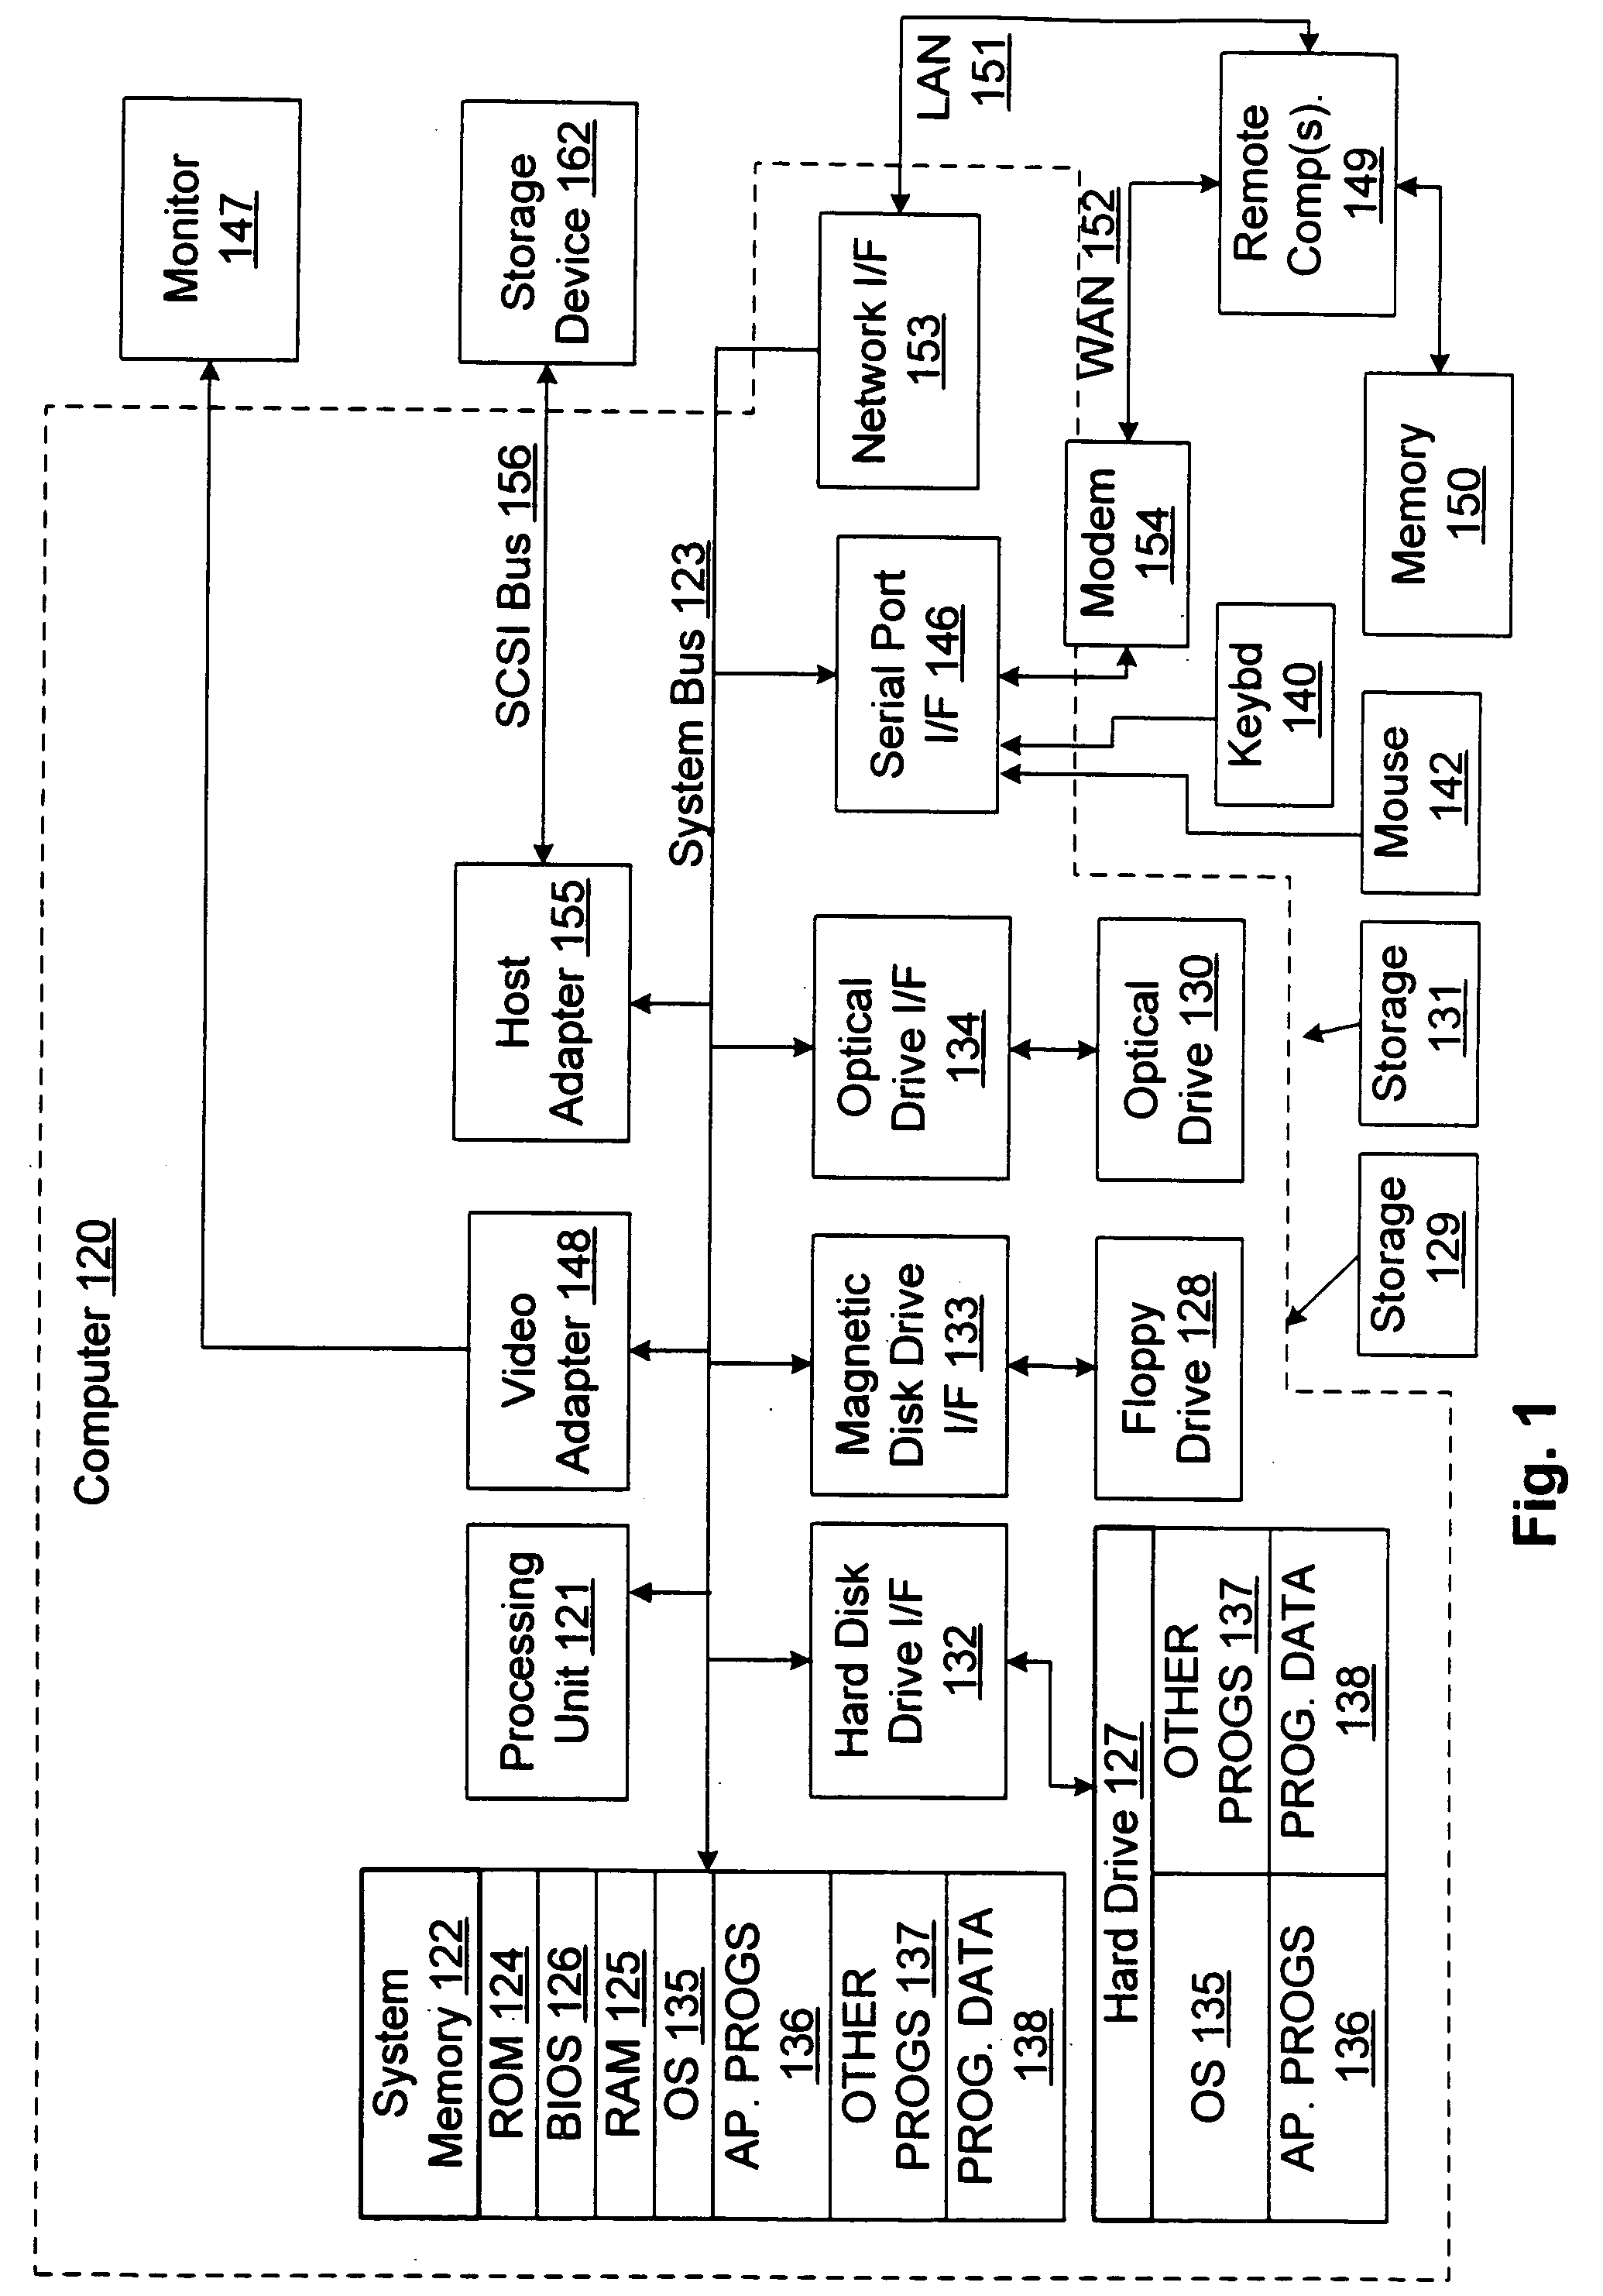 Dynamic link control object for dynamically presenting link options in connection with a content management server system